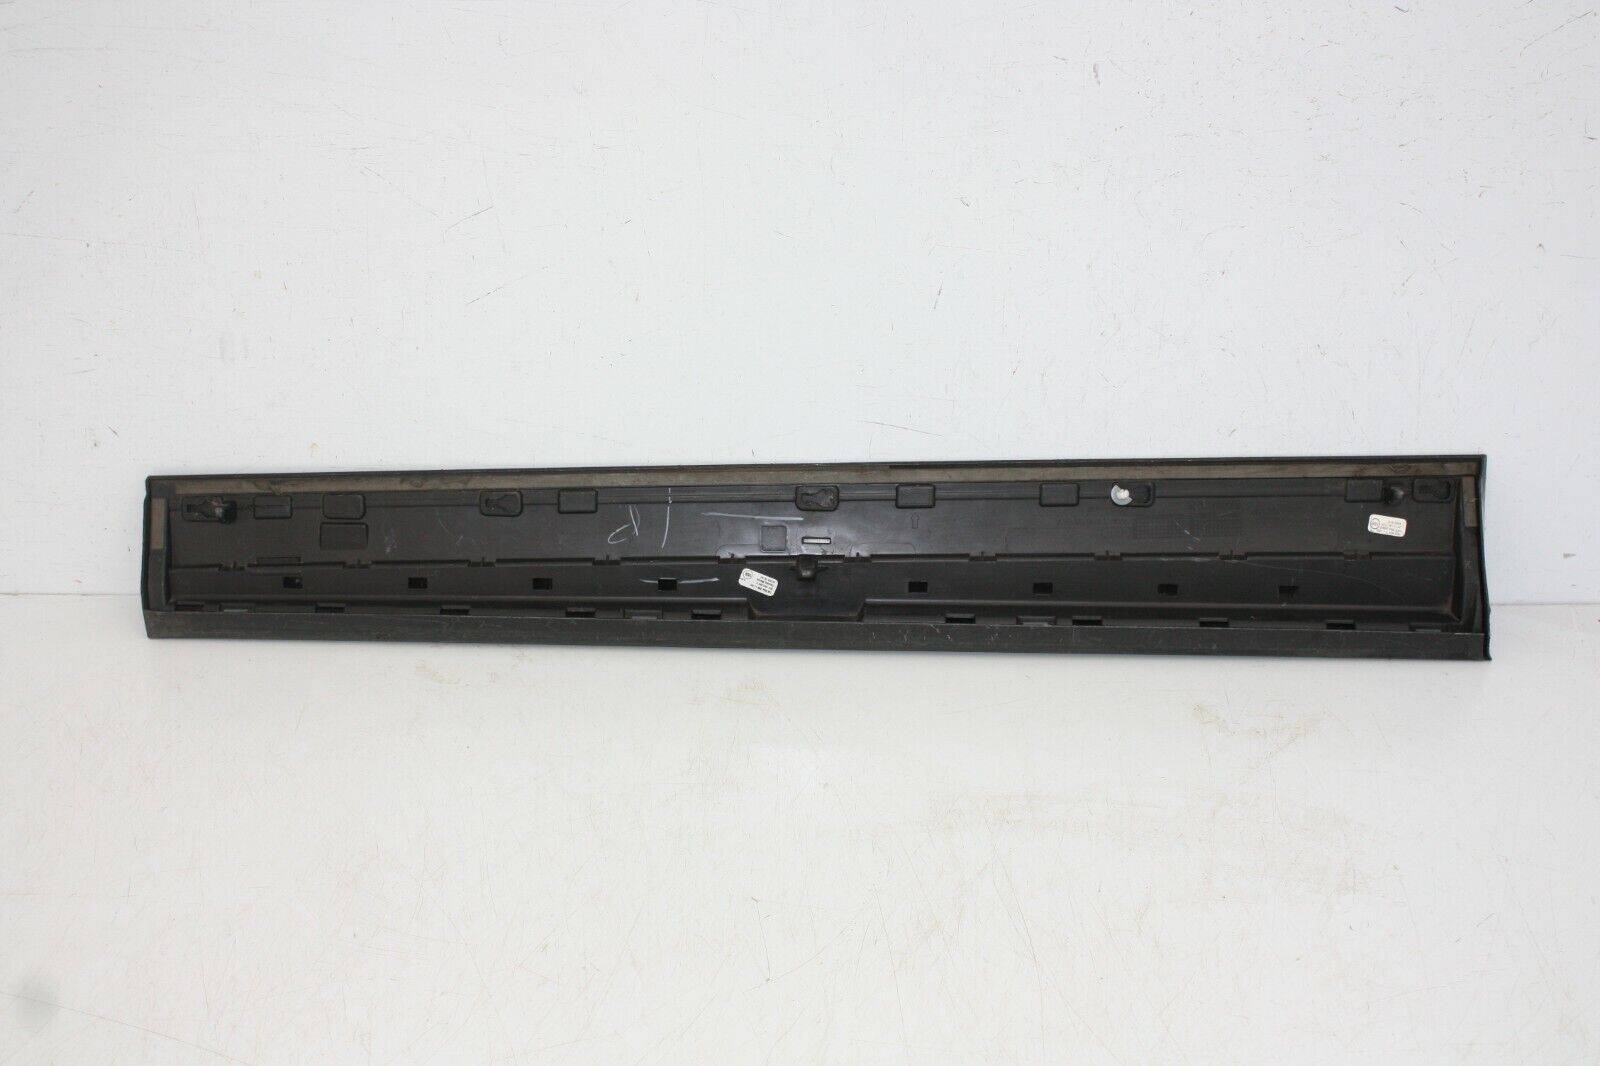 Audi-Q5-S-Line-Front-Right-Door-Moulding-2017-TO-2020-80A853960B-Genuine-175367544189-10